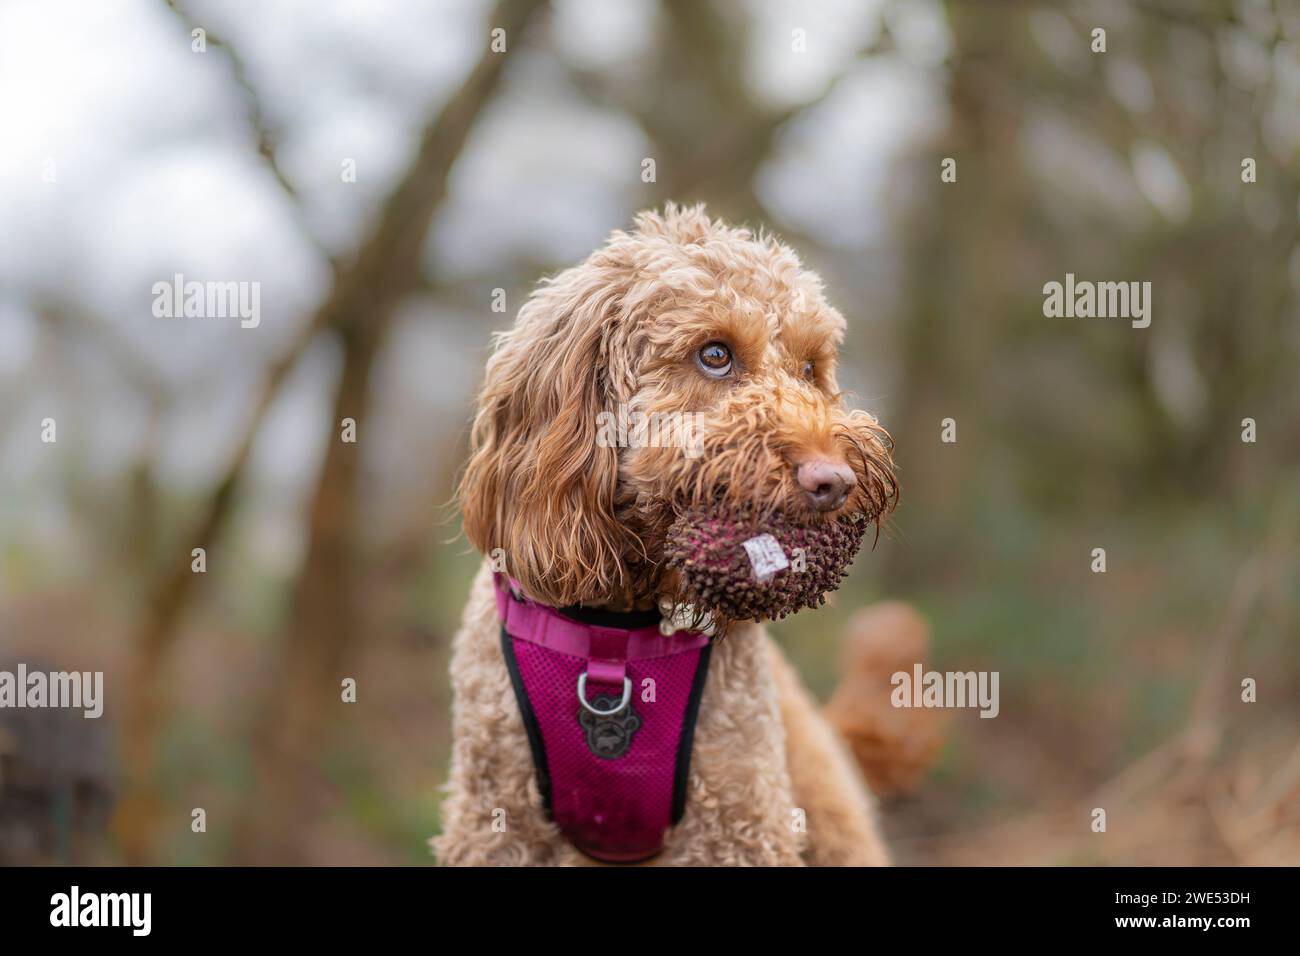 Close up front view of a cockerpoo dog with a fluffy toy in her mouth staring up. Stock Photo